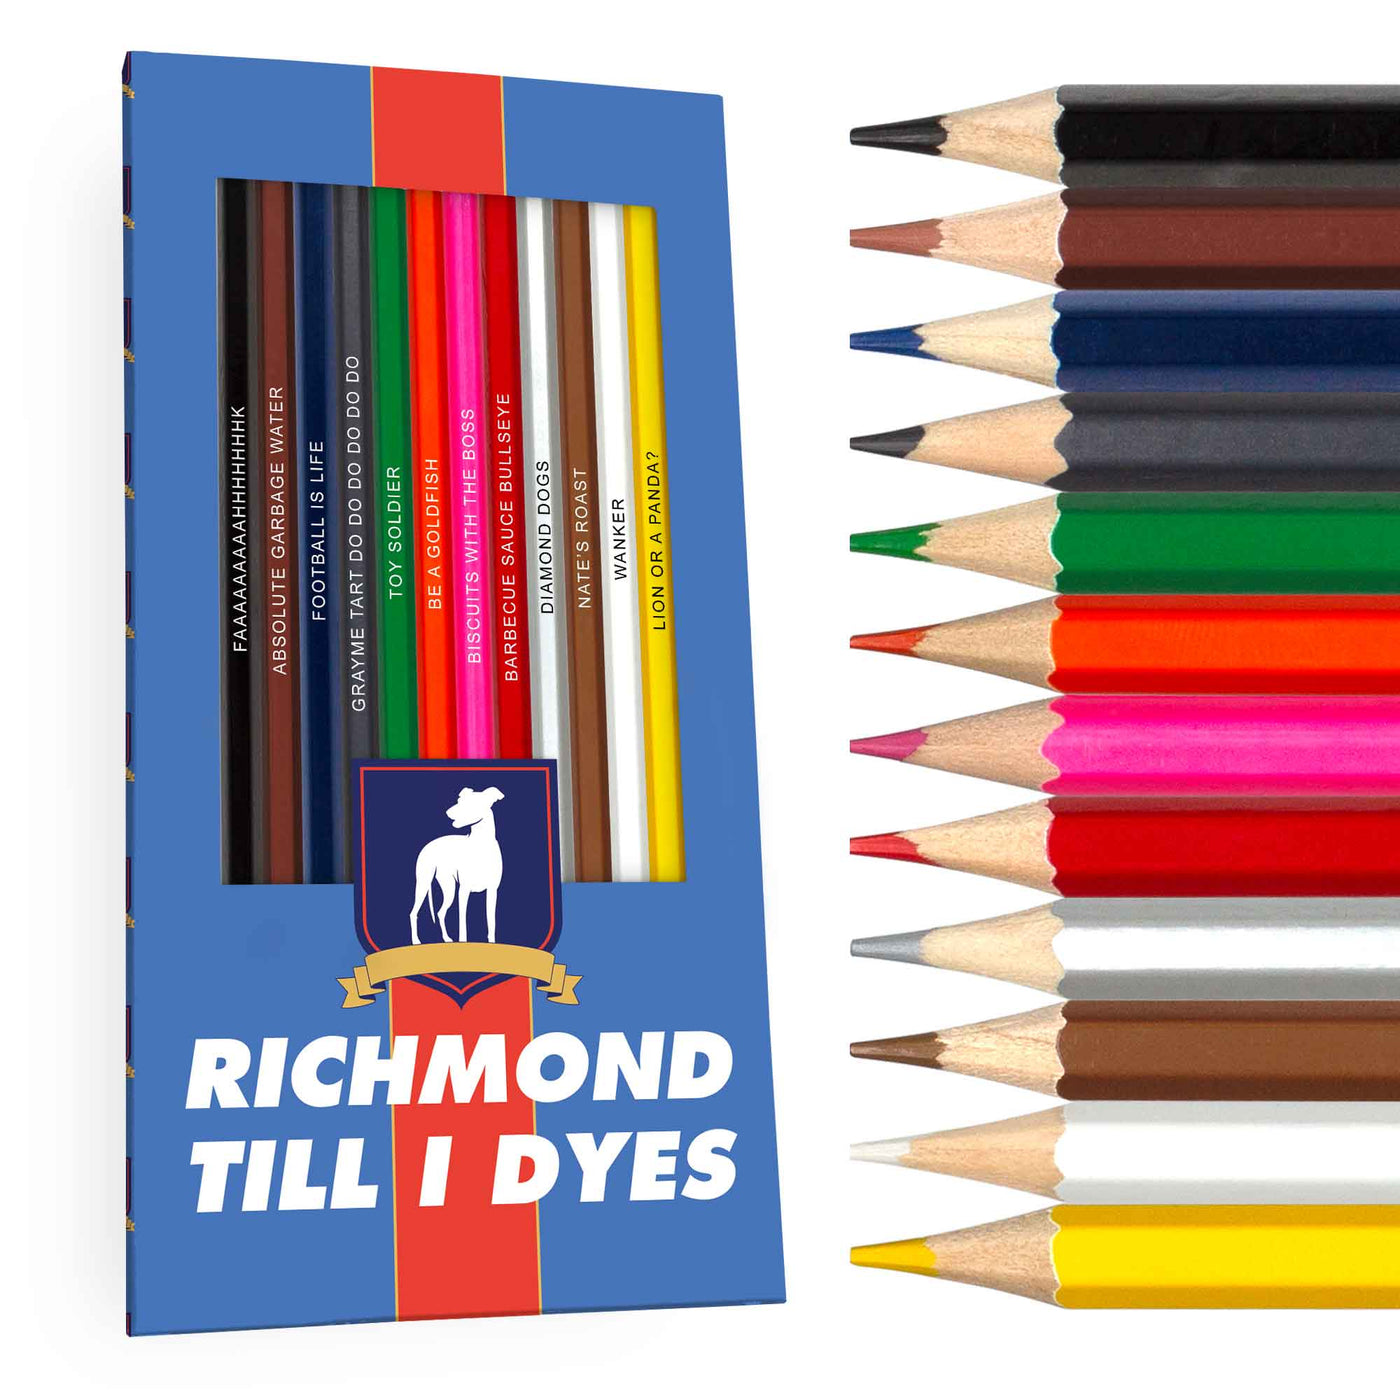 Ted Lasso inspired colored pencil gift set, "Richmind Till I Dyes"